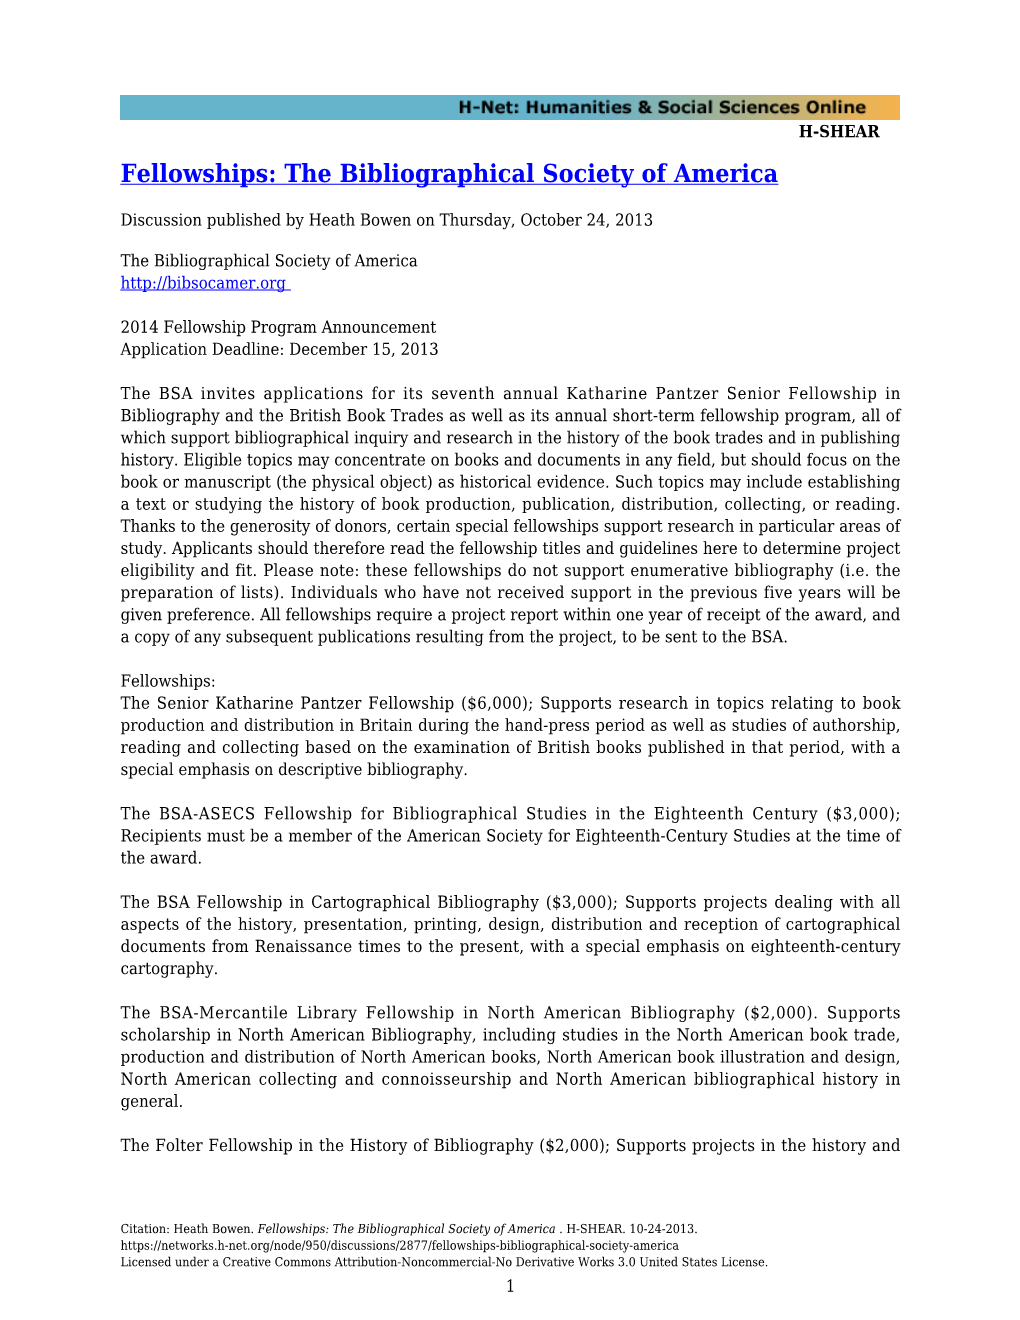 Fellowships: the Bibliographical Society of America